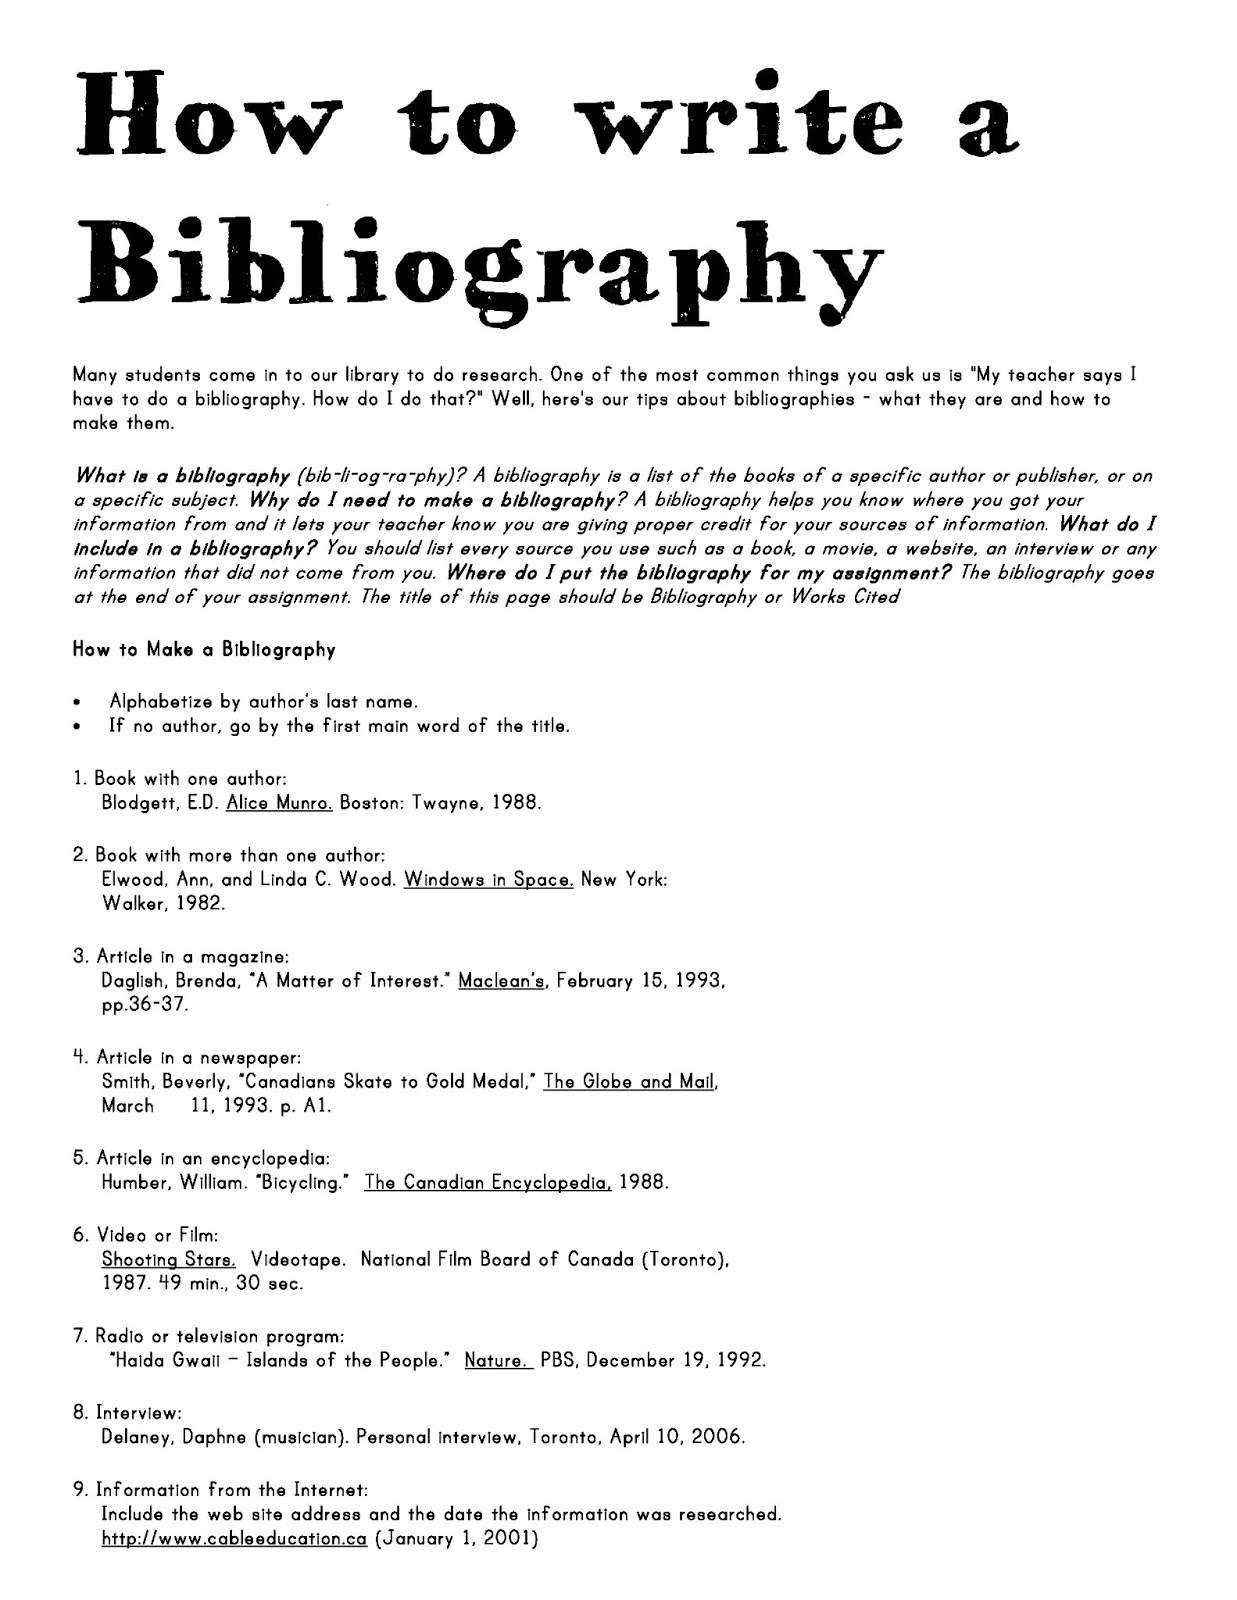 Bibliography done for you